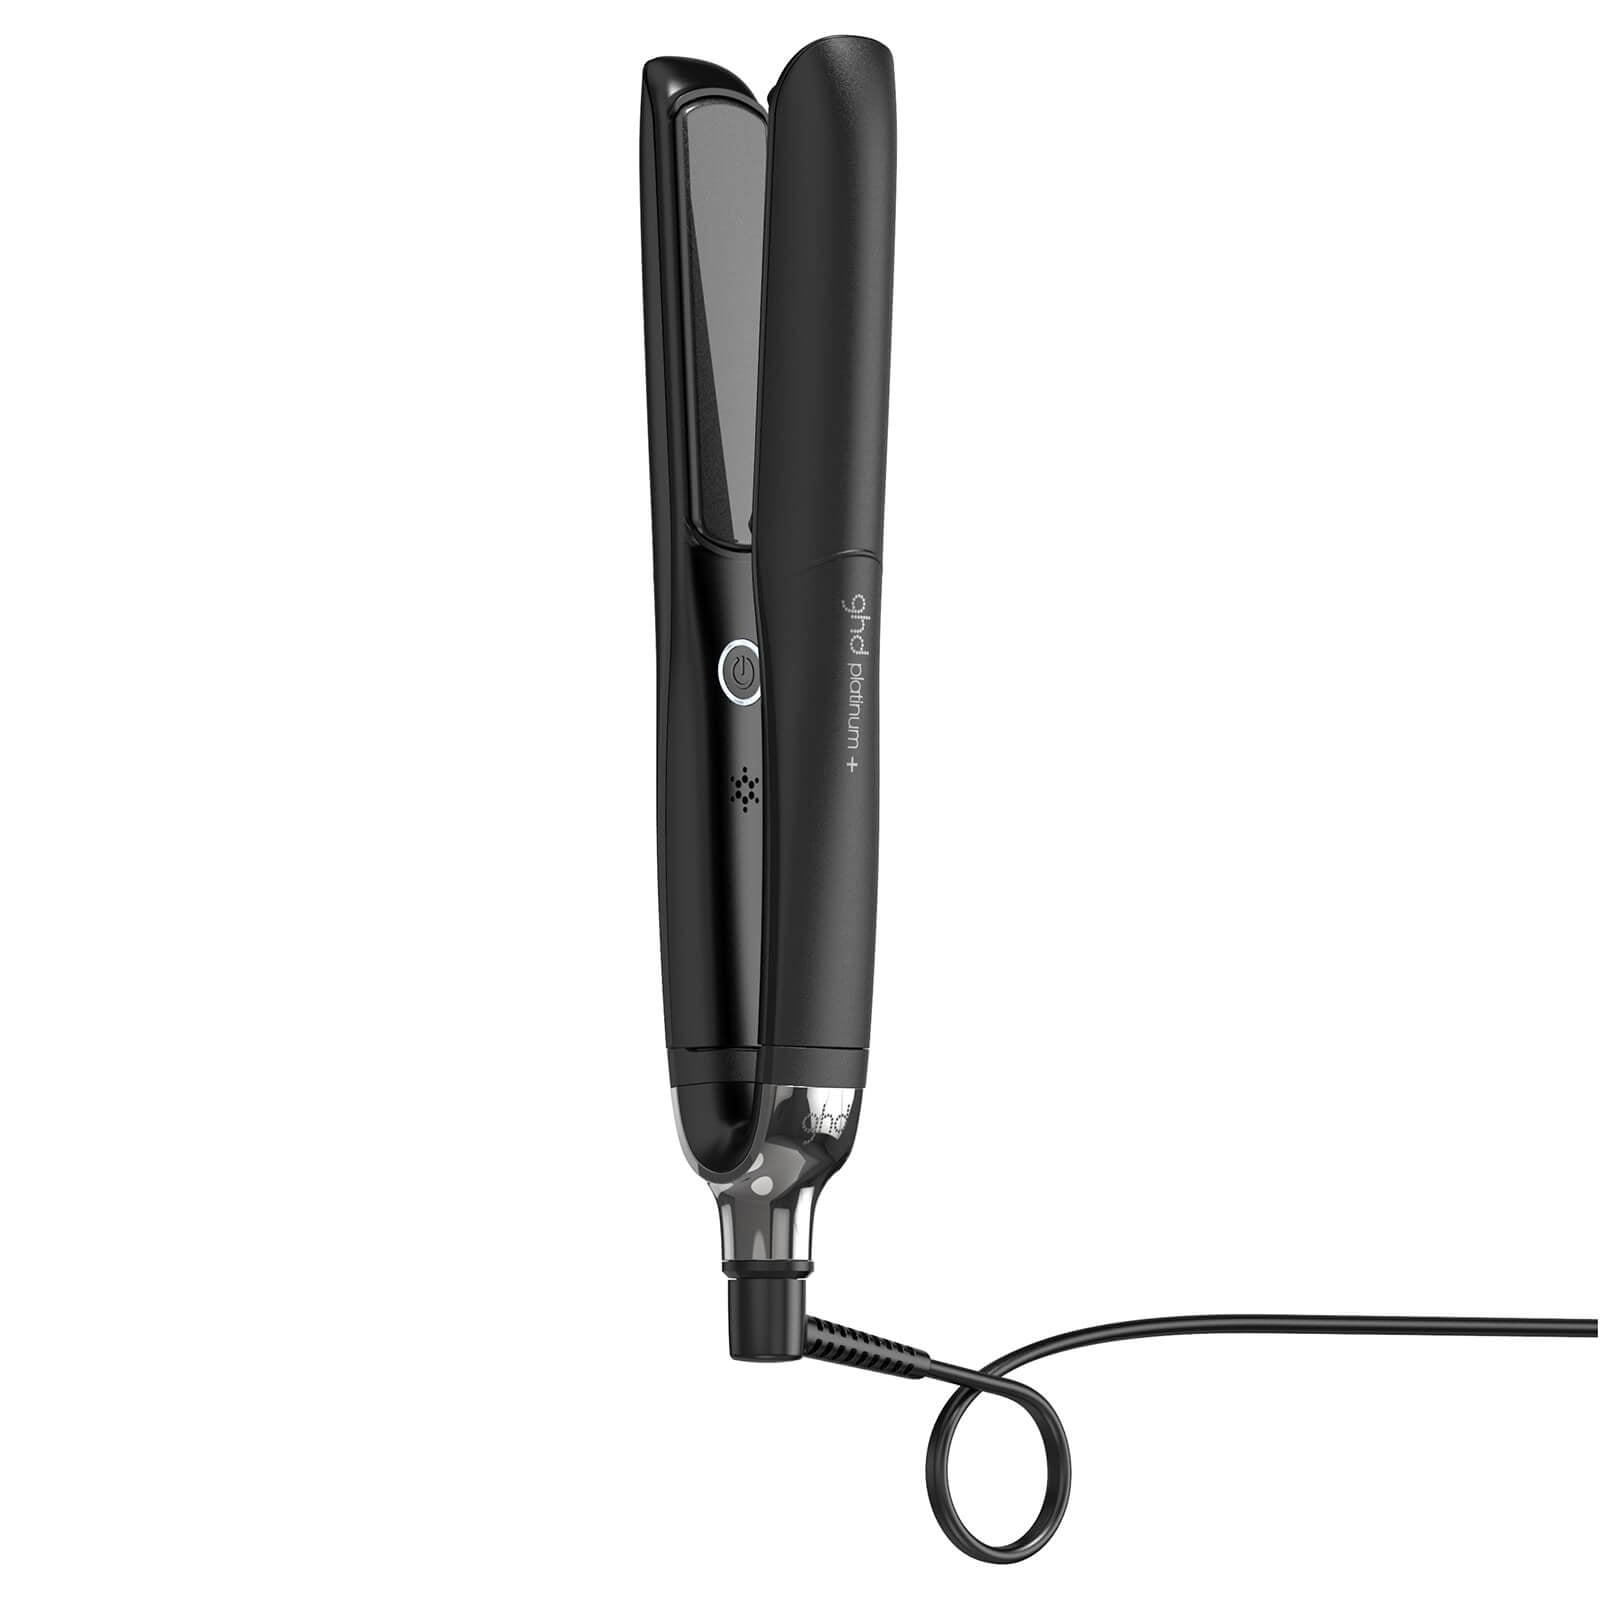 ghd Platinum+ flat irons for easy styles